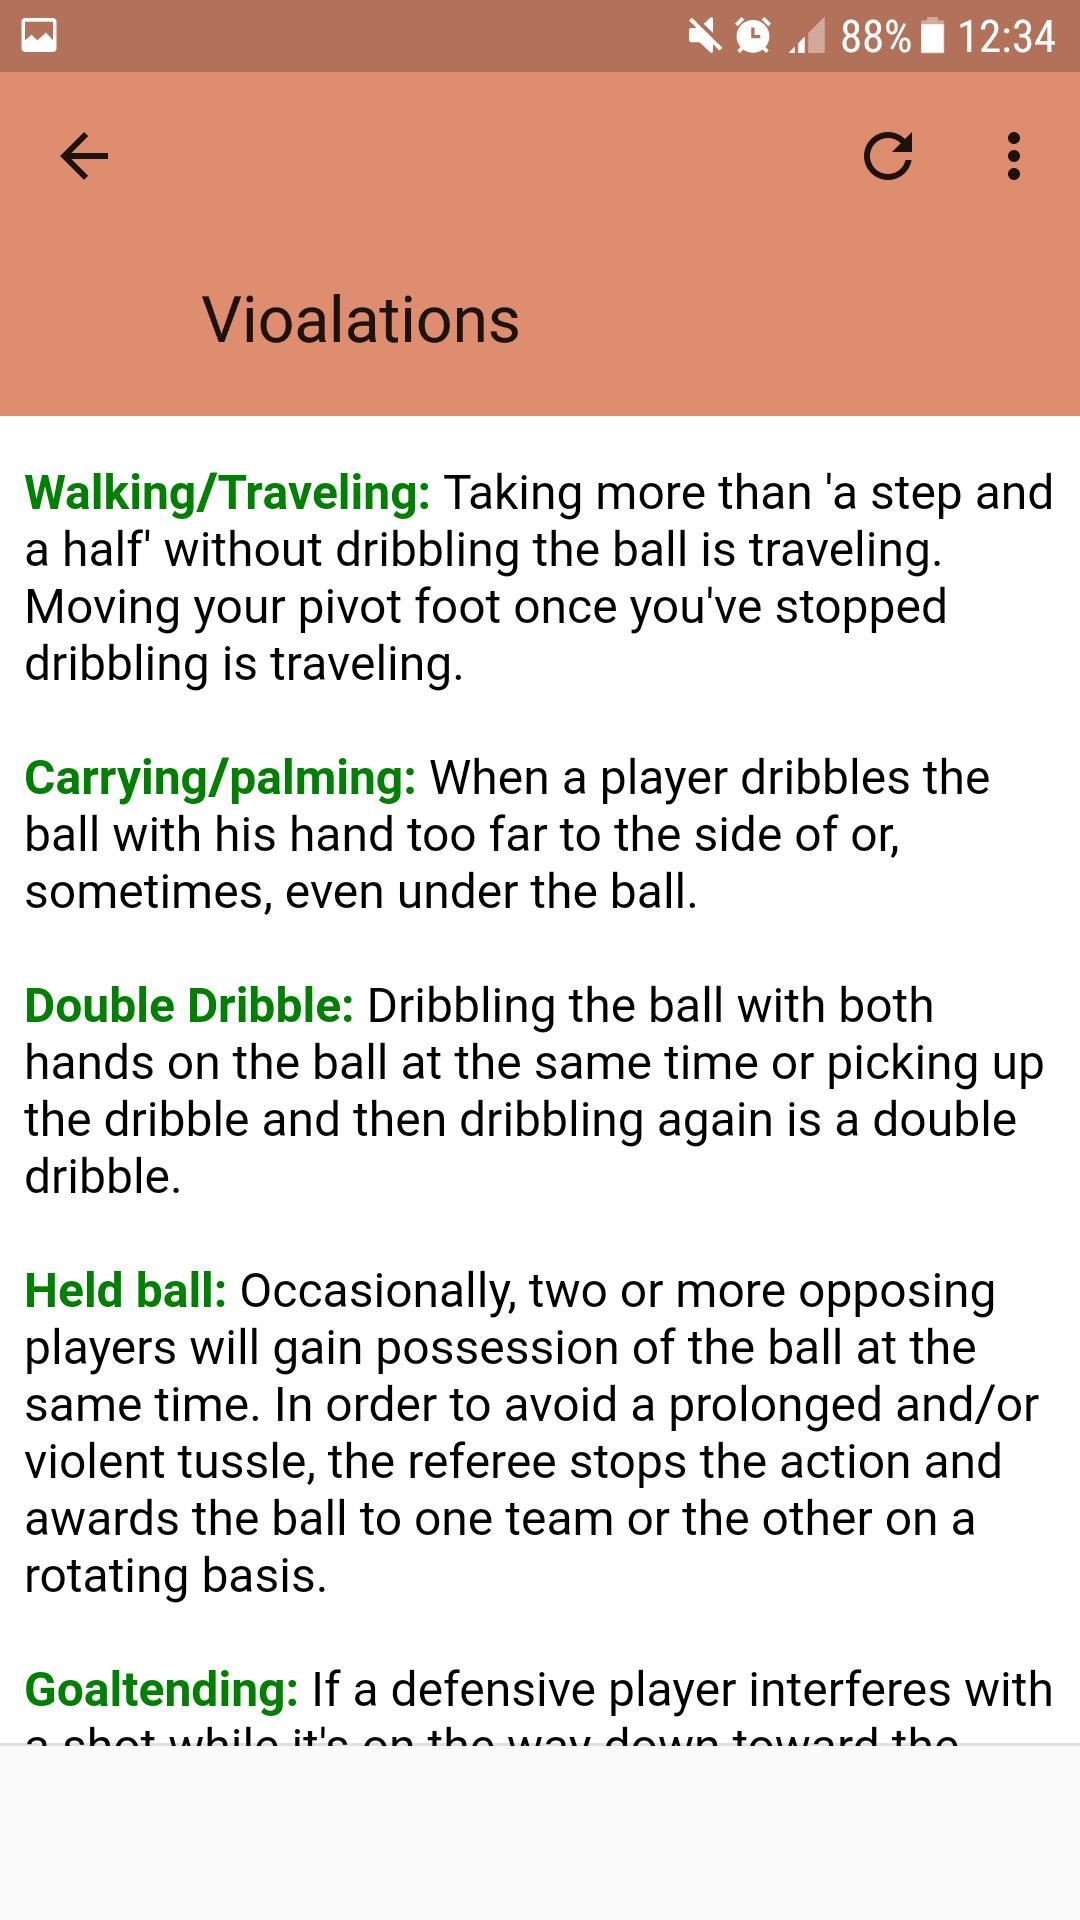 Basketball rules for Android - APK Download